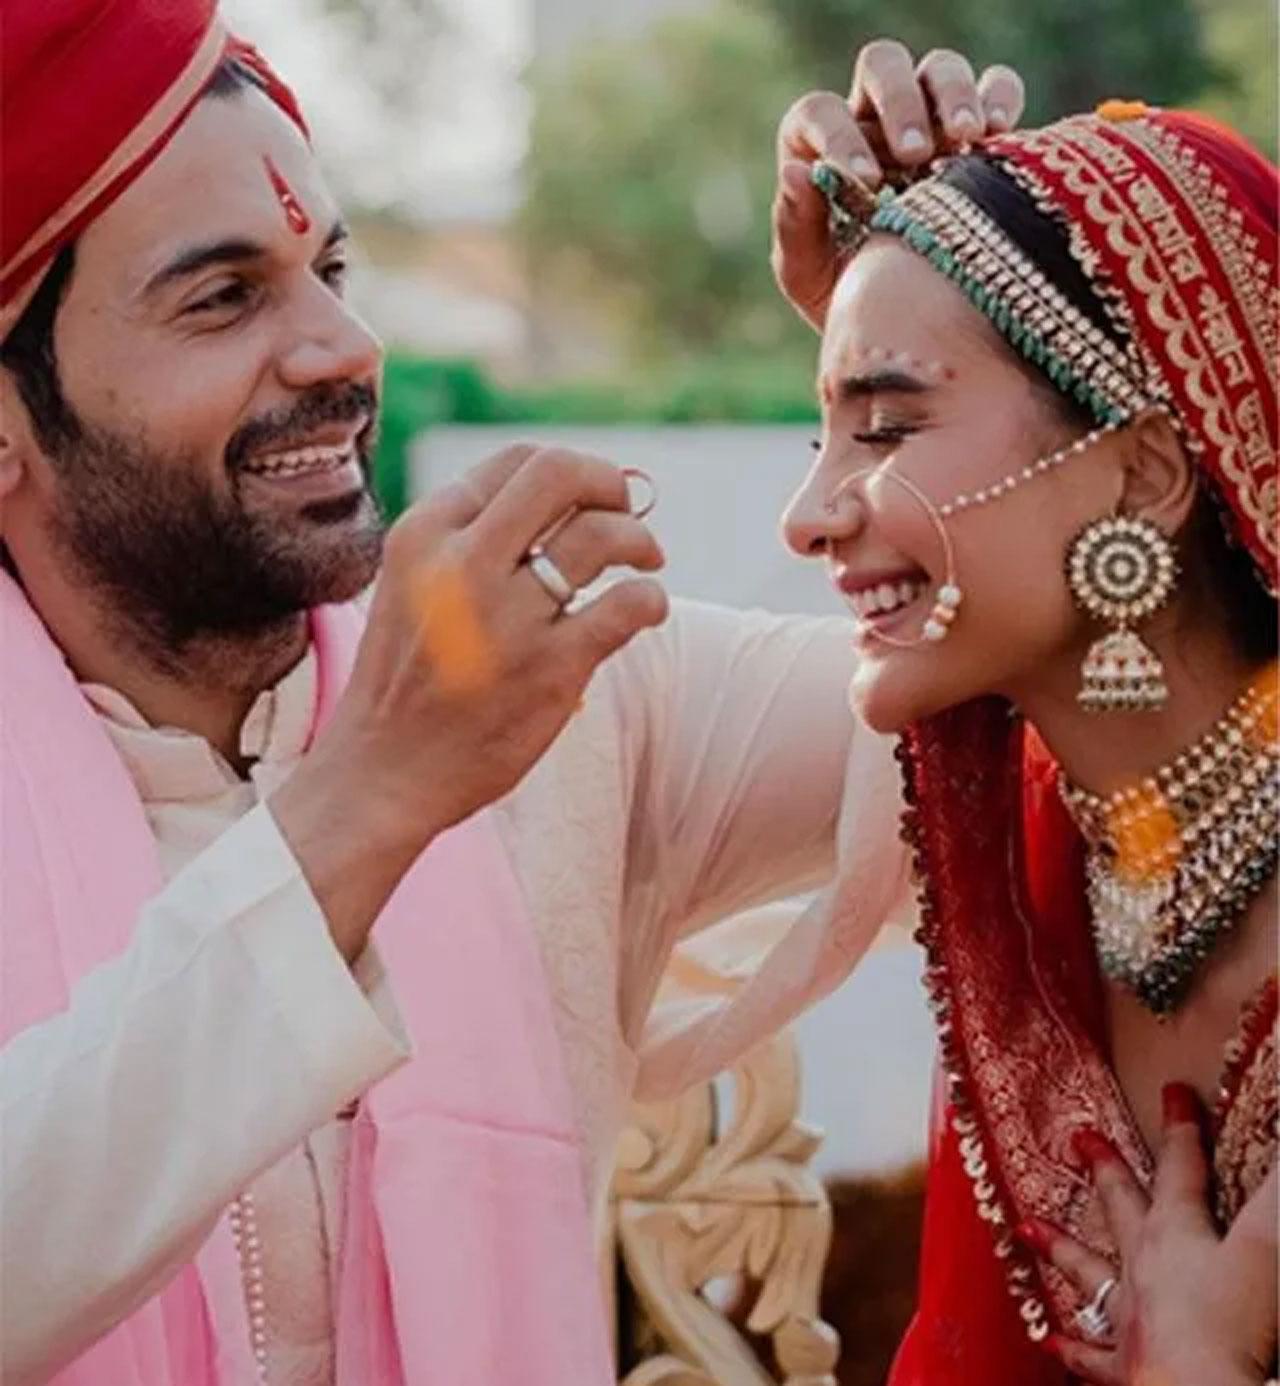 After a long wait, Bollywood couple Rajkummar Rao and Patralekhaa tied the knot in Chandigarh on Monday, November 15 in Chandigarh. They both wore ace designer Sabyasachi’s outfit and looked dreamy. Patralekhaa, being a Bengali, chose to go with a fusion-Bengali bride look featuring an alluring red lehenga and ornate gold jewelry to complete her attire. Rajkummar Rao donned a cream-coloured Sherwani and needless to say, he perfectly complimented his bride and the love of his life.